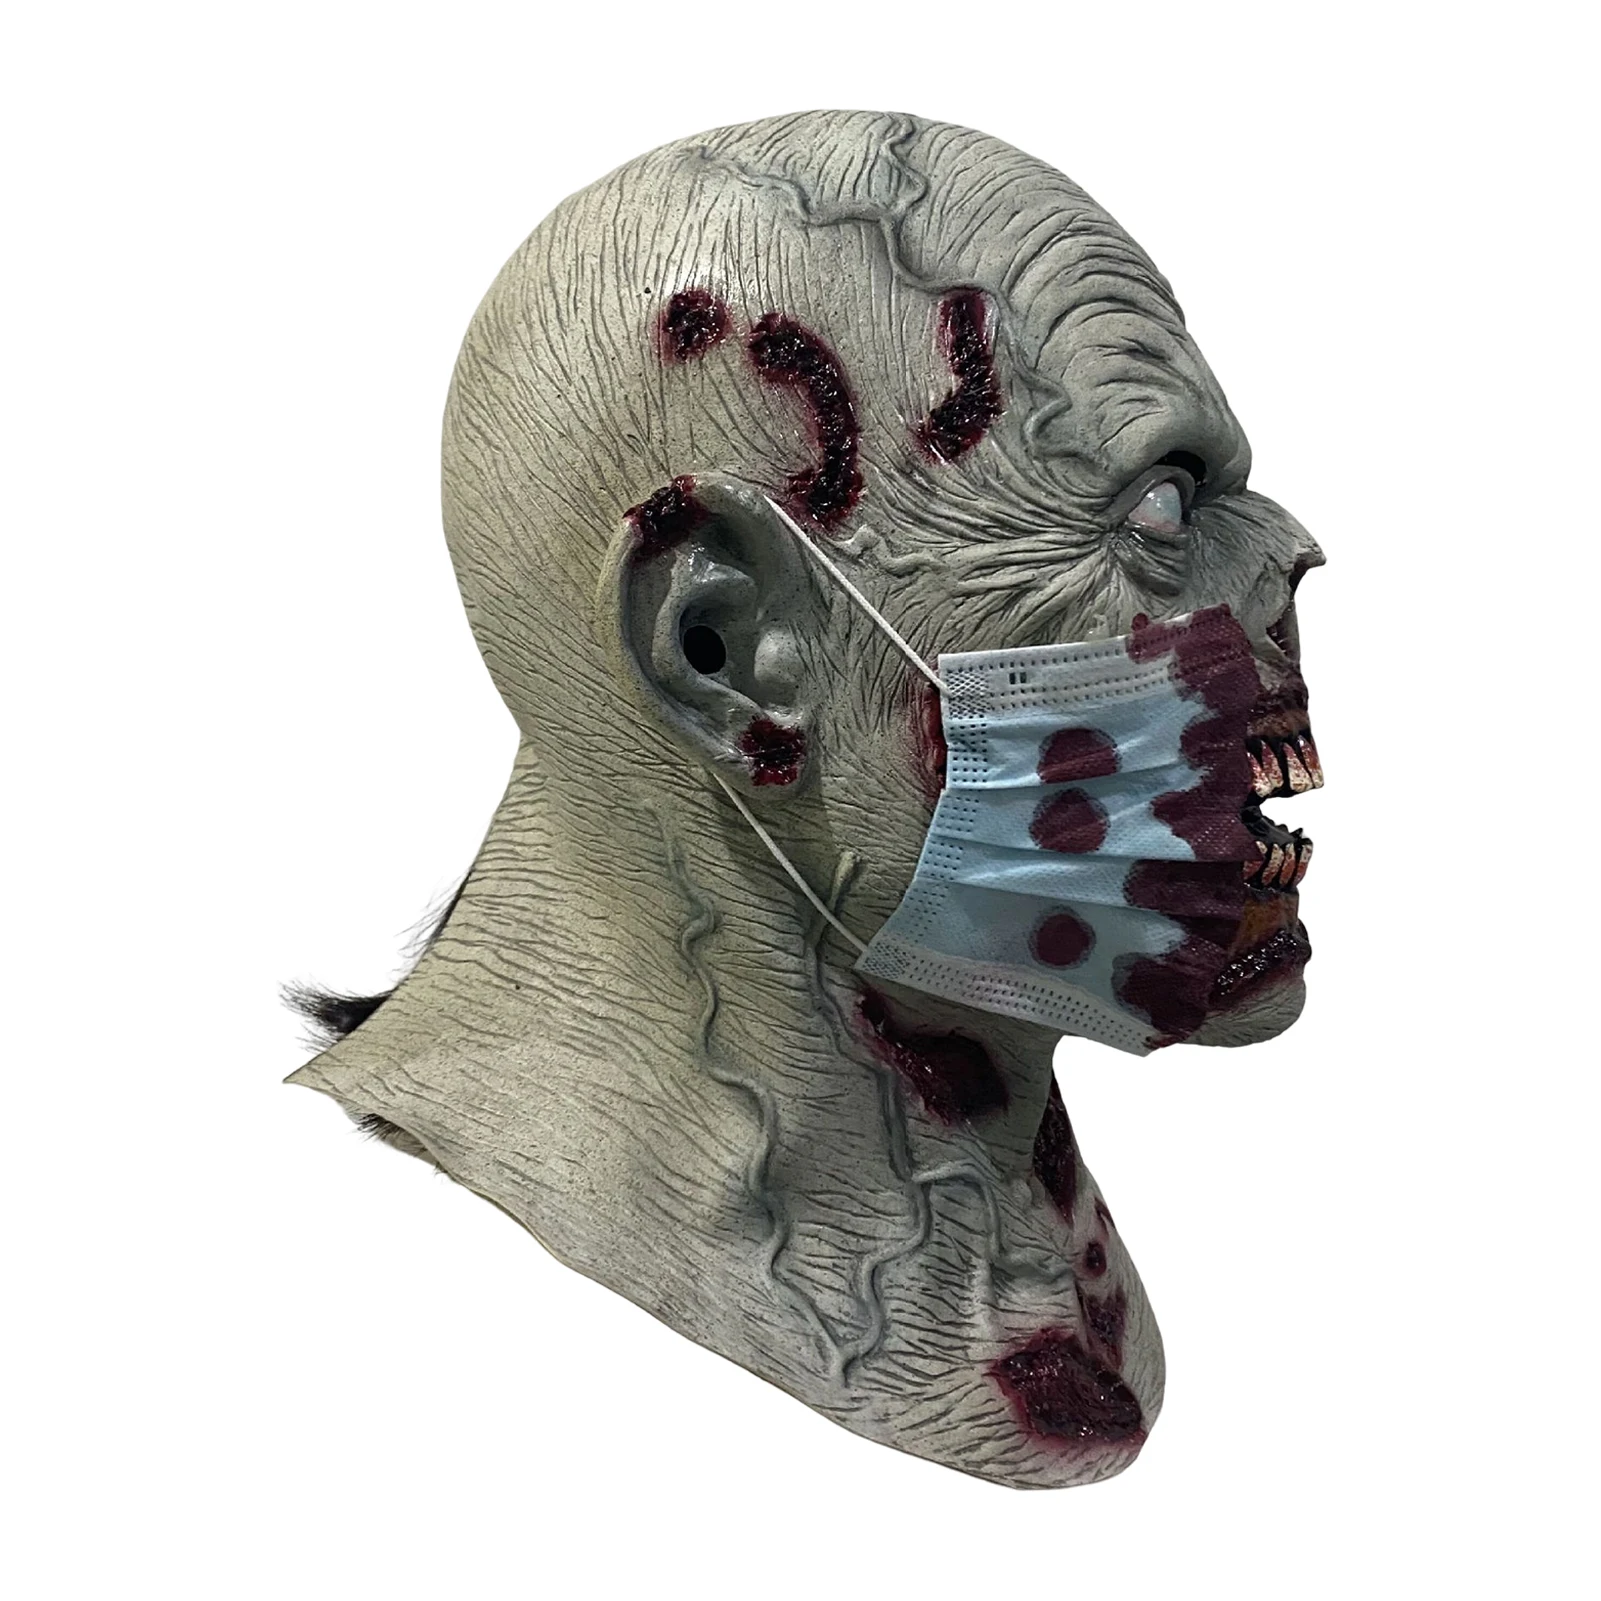 Sdoveb Halloween Scary Face Mask - Bloody Zombie Glowing Eyes Headgear with  Hair for Halloween Realistic Mask (B) : Toys & Games 